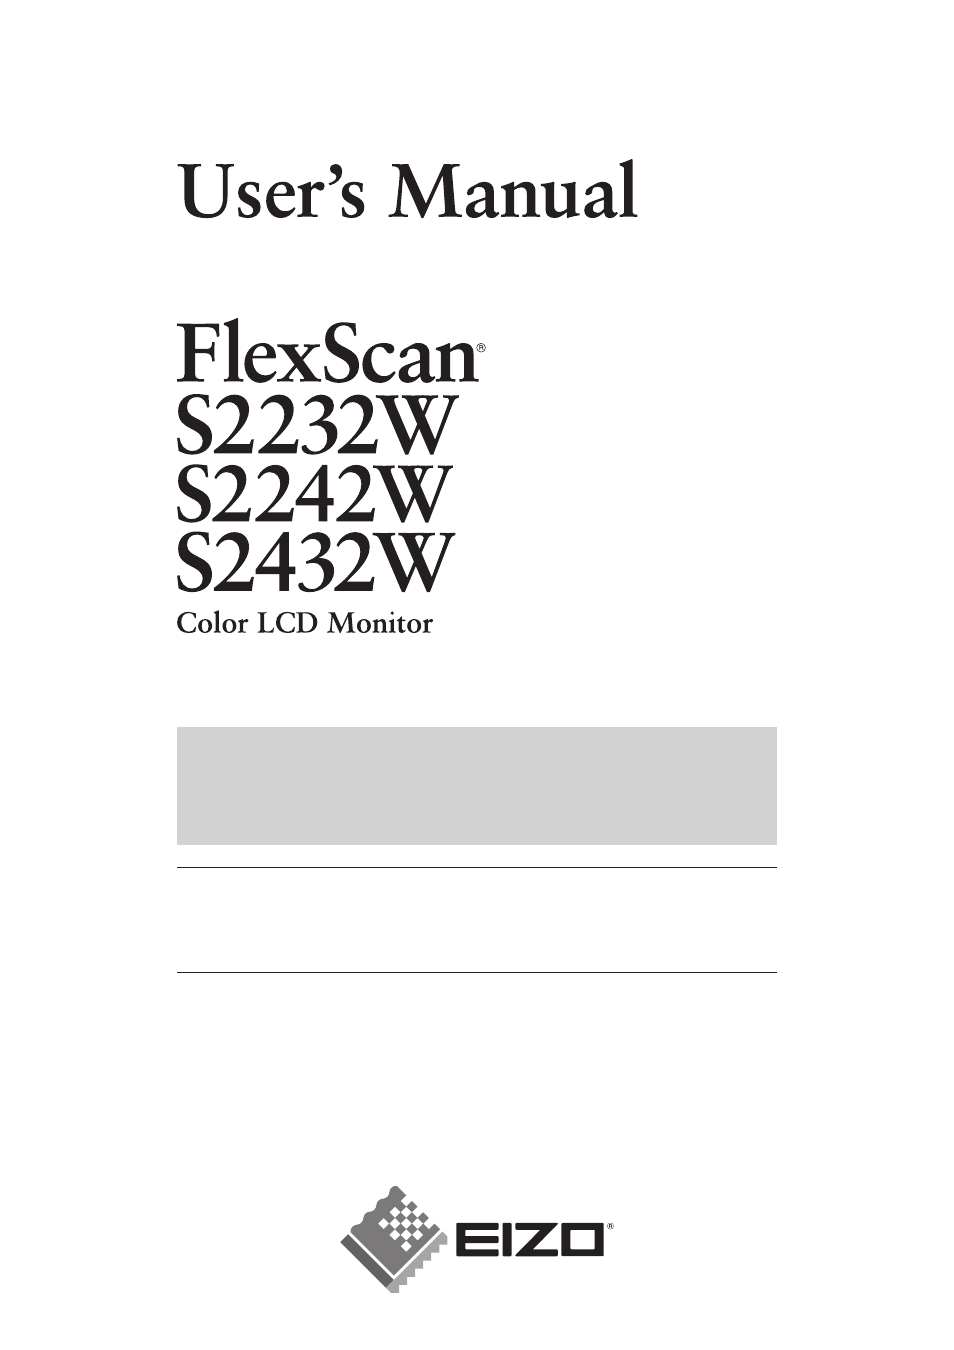 Eizo FlexScan Color LCD Monitor S2242W User Manual | 51 pages